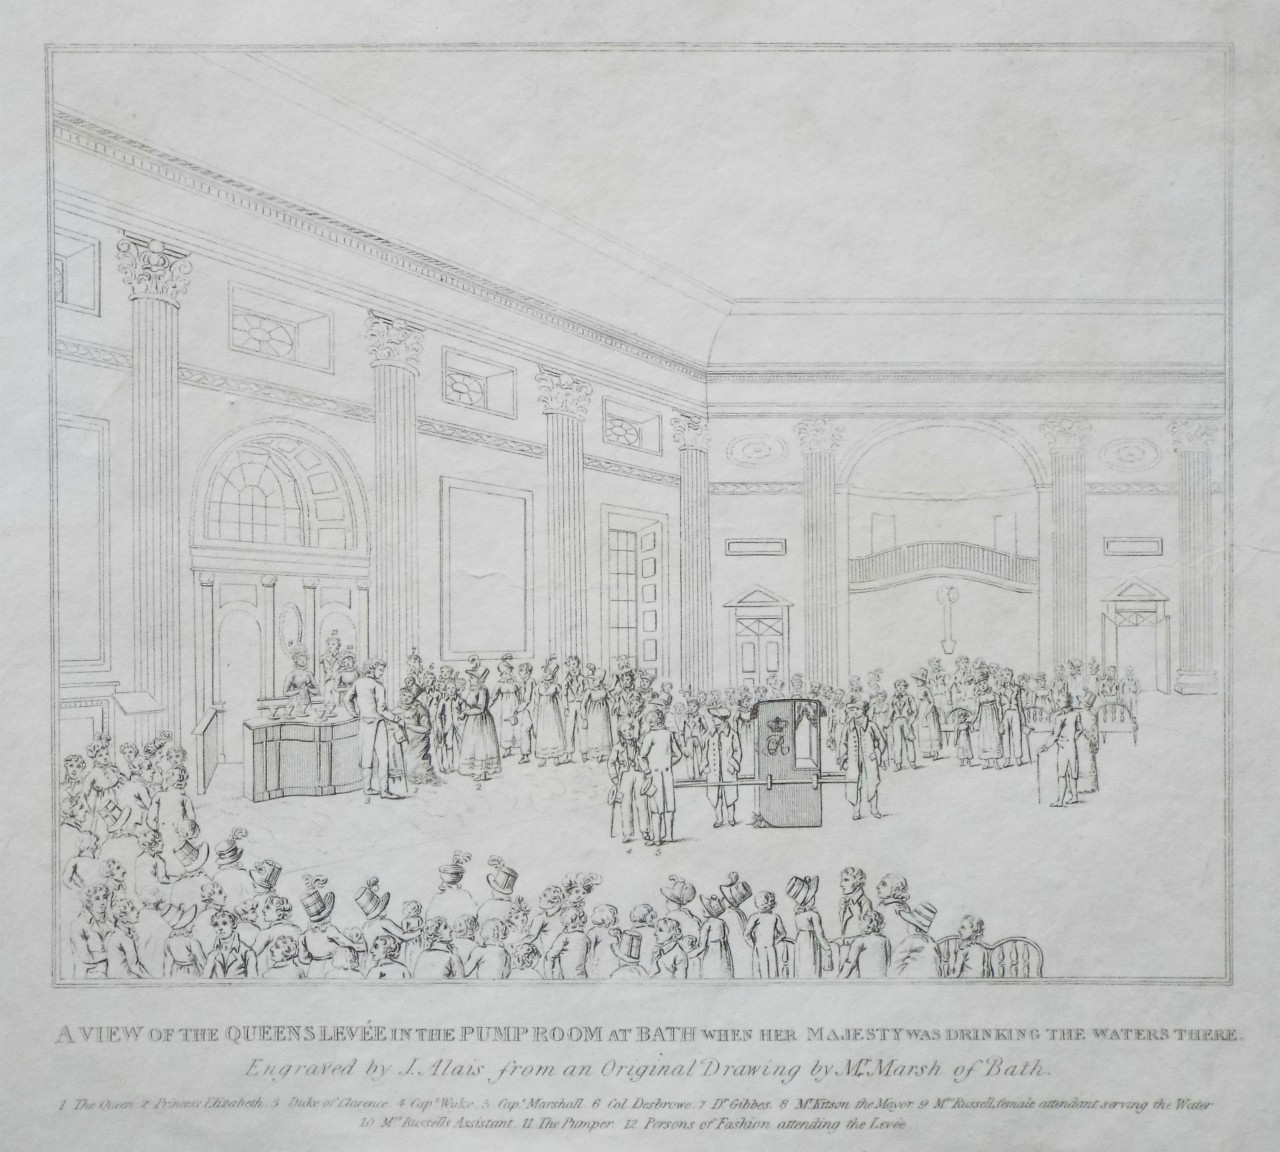 Print - A View of the Queens Levee in the Pump Room at Bath when her Majesty was Drinking the Waters there. Engraved by J. Alais from an Original Drawing by Mr. Marsh of Bath. - Alais